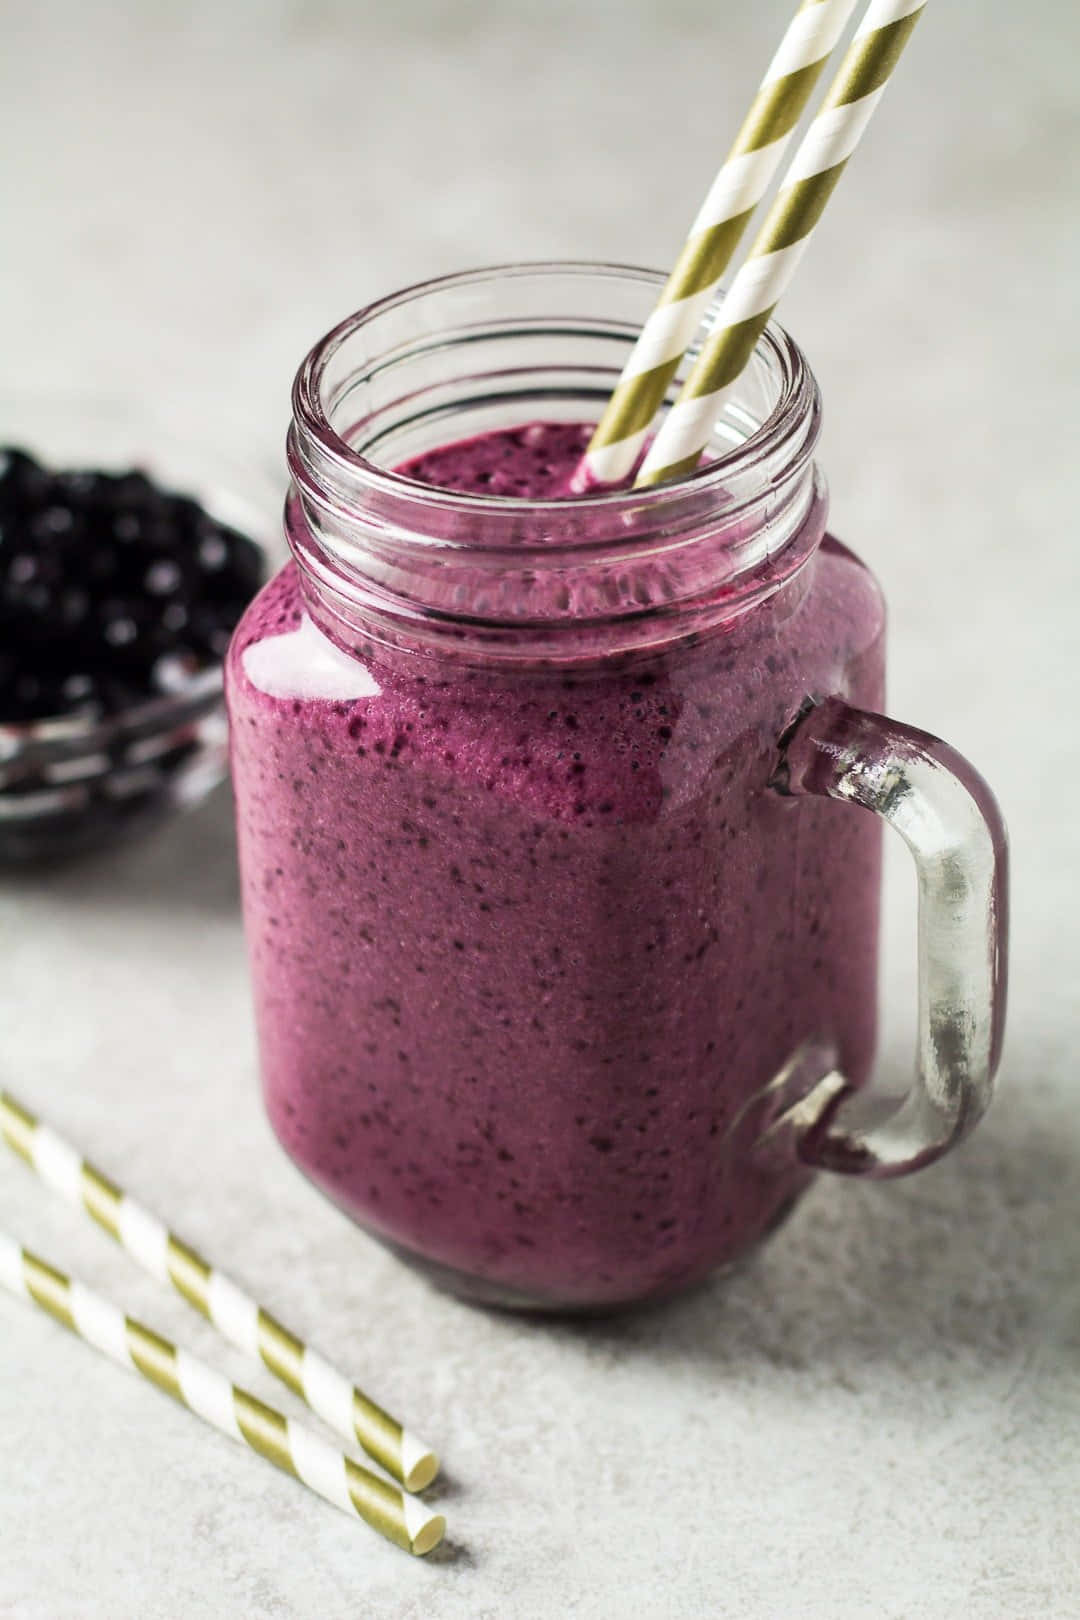 Enjoy a delicious and nutritious blueberry smoothie at home! Wallpaper